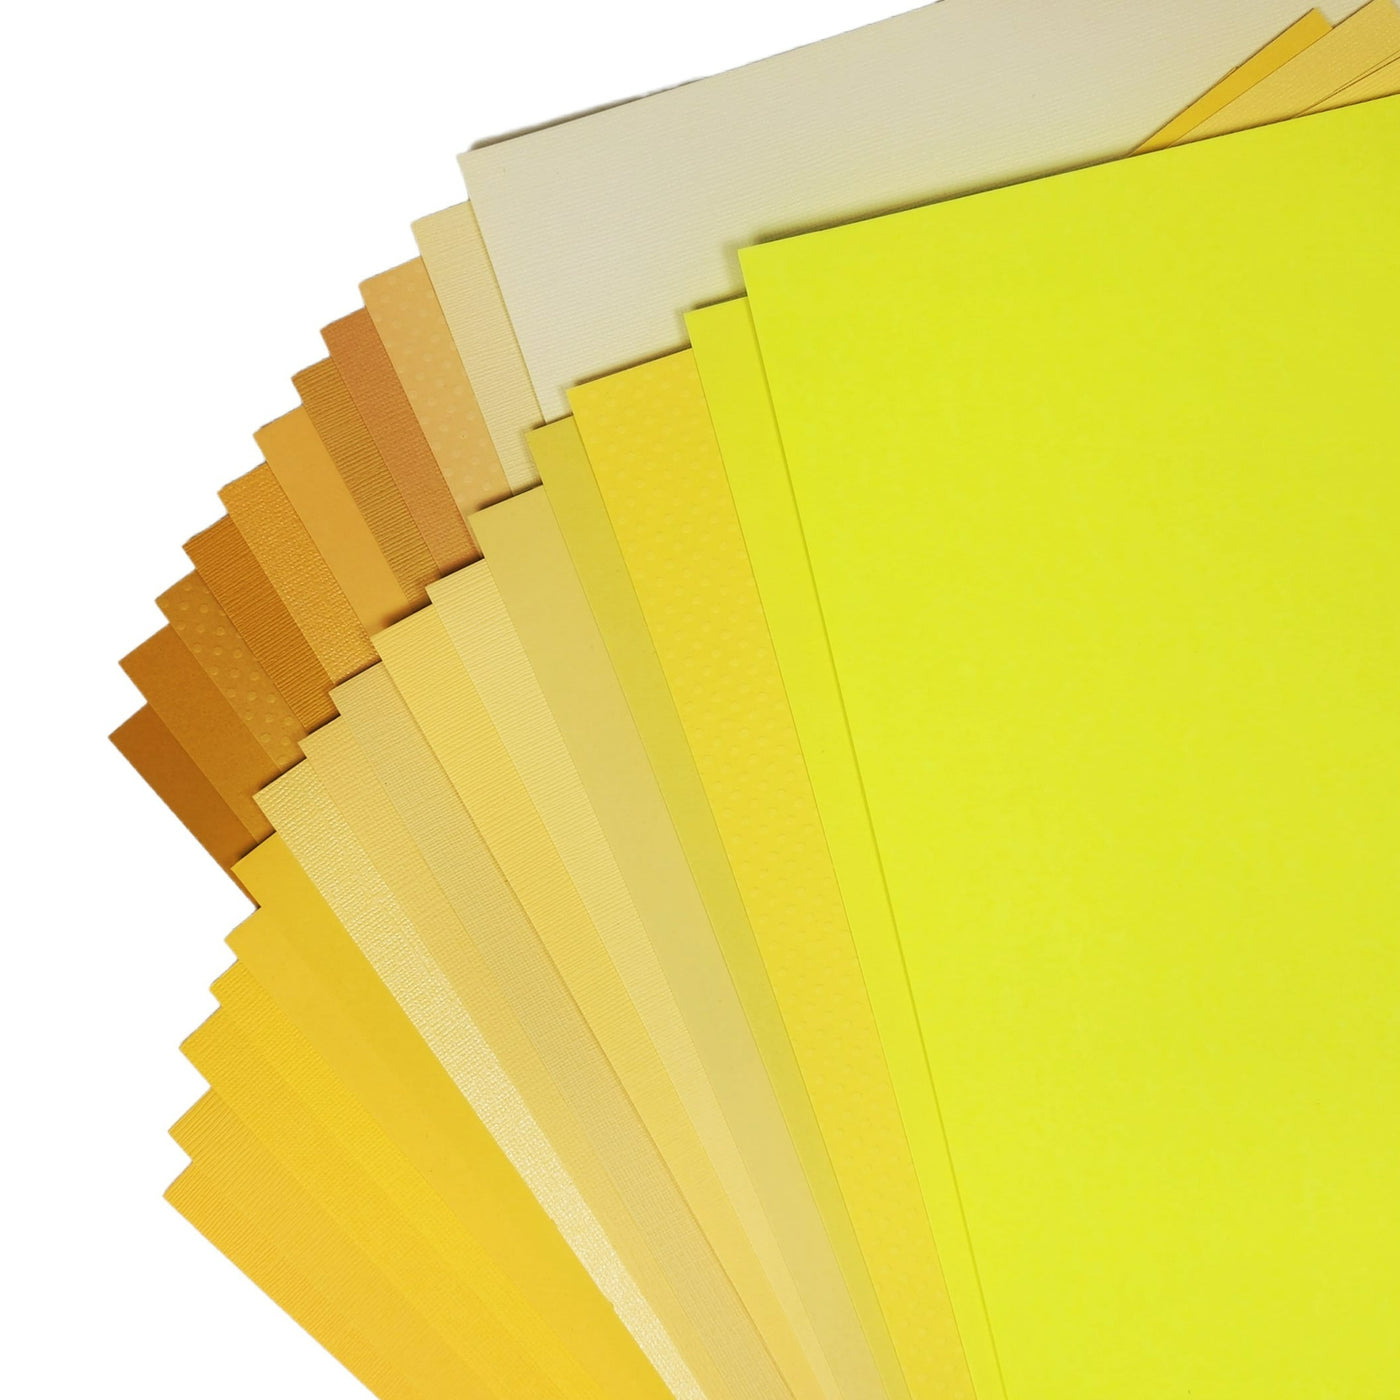 This sampler has one sheet of each Yellow Bazzill cardstock we carry. 